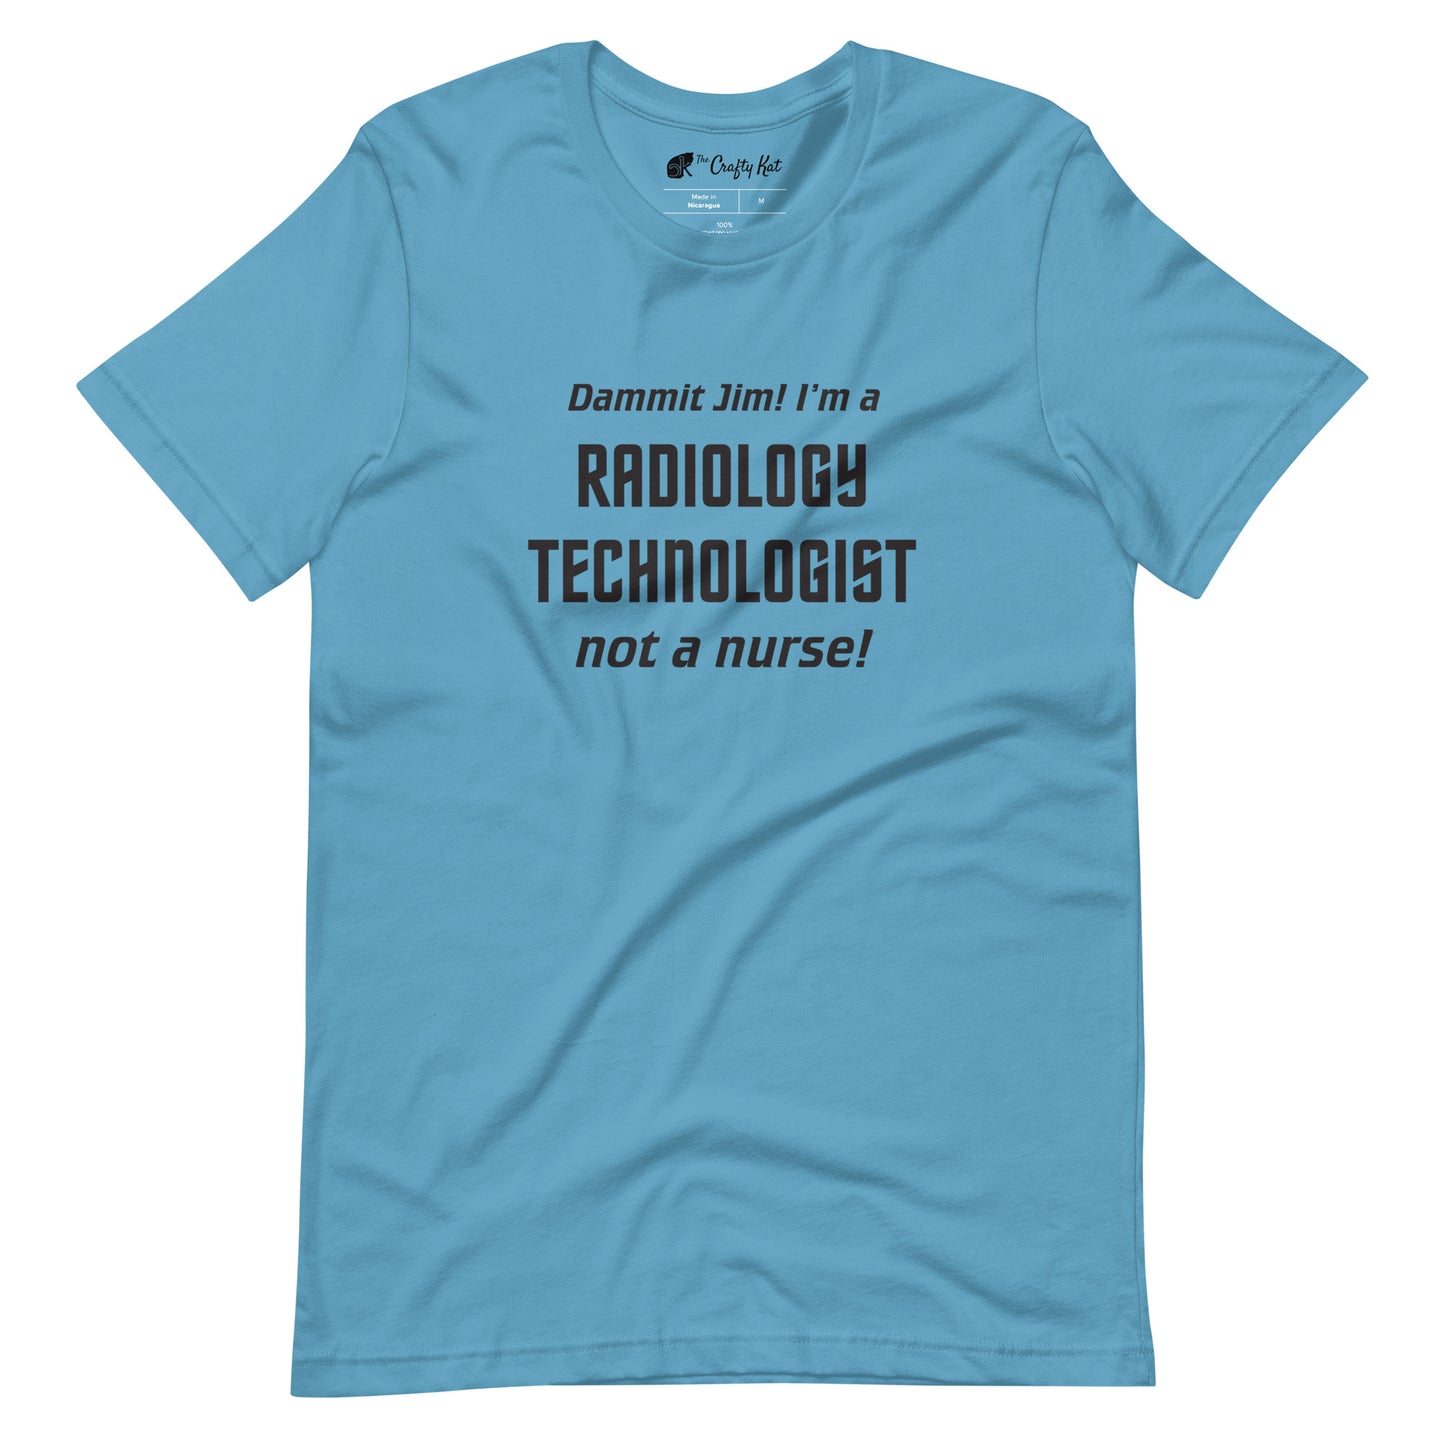 Ocean Blue t-shirt with text graphic in Star Trek font: "Dammit Jim! I'm a RADIOLOGY TECHNOLOGIST not a nurse!"